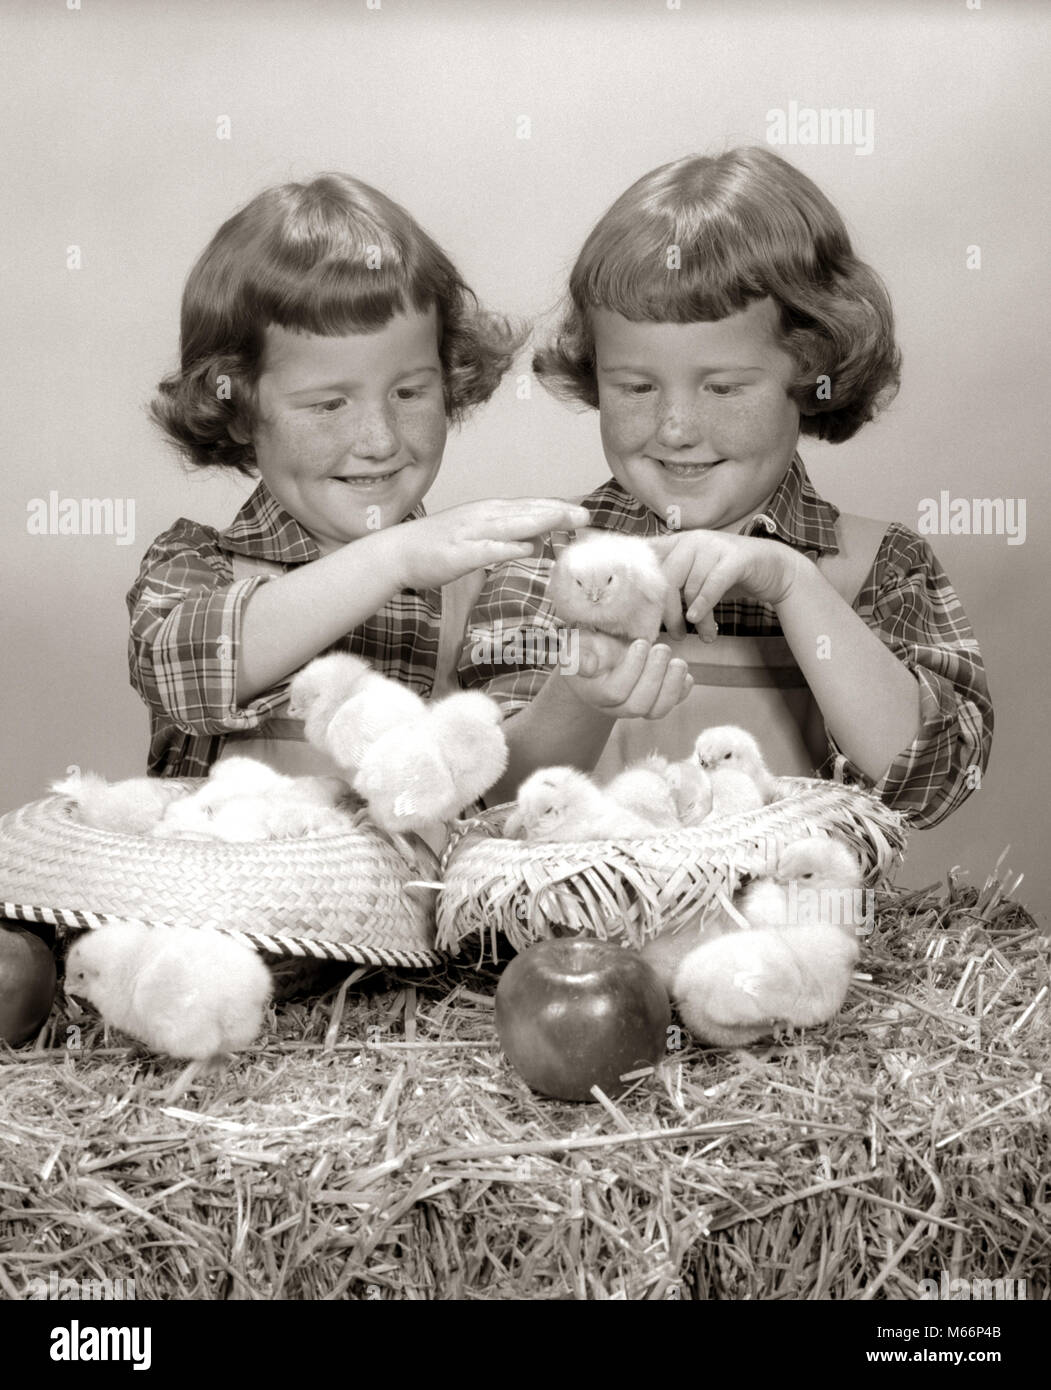 1950s TWO TWIN GIRLS PLAYING WITH BABY CHICKS TWINS PAIR STRAW BALE HATS APPLE - p402 HAR001 HARS ANIMALS FRECKLES SIBLINGS SISTERS NOSTALGIA AGRICULTURE TOGETHERNESS 3-4 YEARS MATCHING SAME 5-6 YEARS CHICK HAPPINESS EXCITEMENT SIBLING COOPERATION GROW SMALL GROUP OF ANIMALS LOOK-ALIKE BALE CREATURE DUPLICATE FOWL JUVENILES LOOK ALIKE POULTRY B&W BABY CHICK BANGS BLACK AND WHITE CAUCASIAN ETHNICITY CHICKS CLONE OLD FASHIONED PERSONS Stock Photo